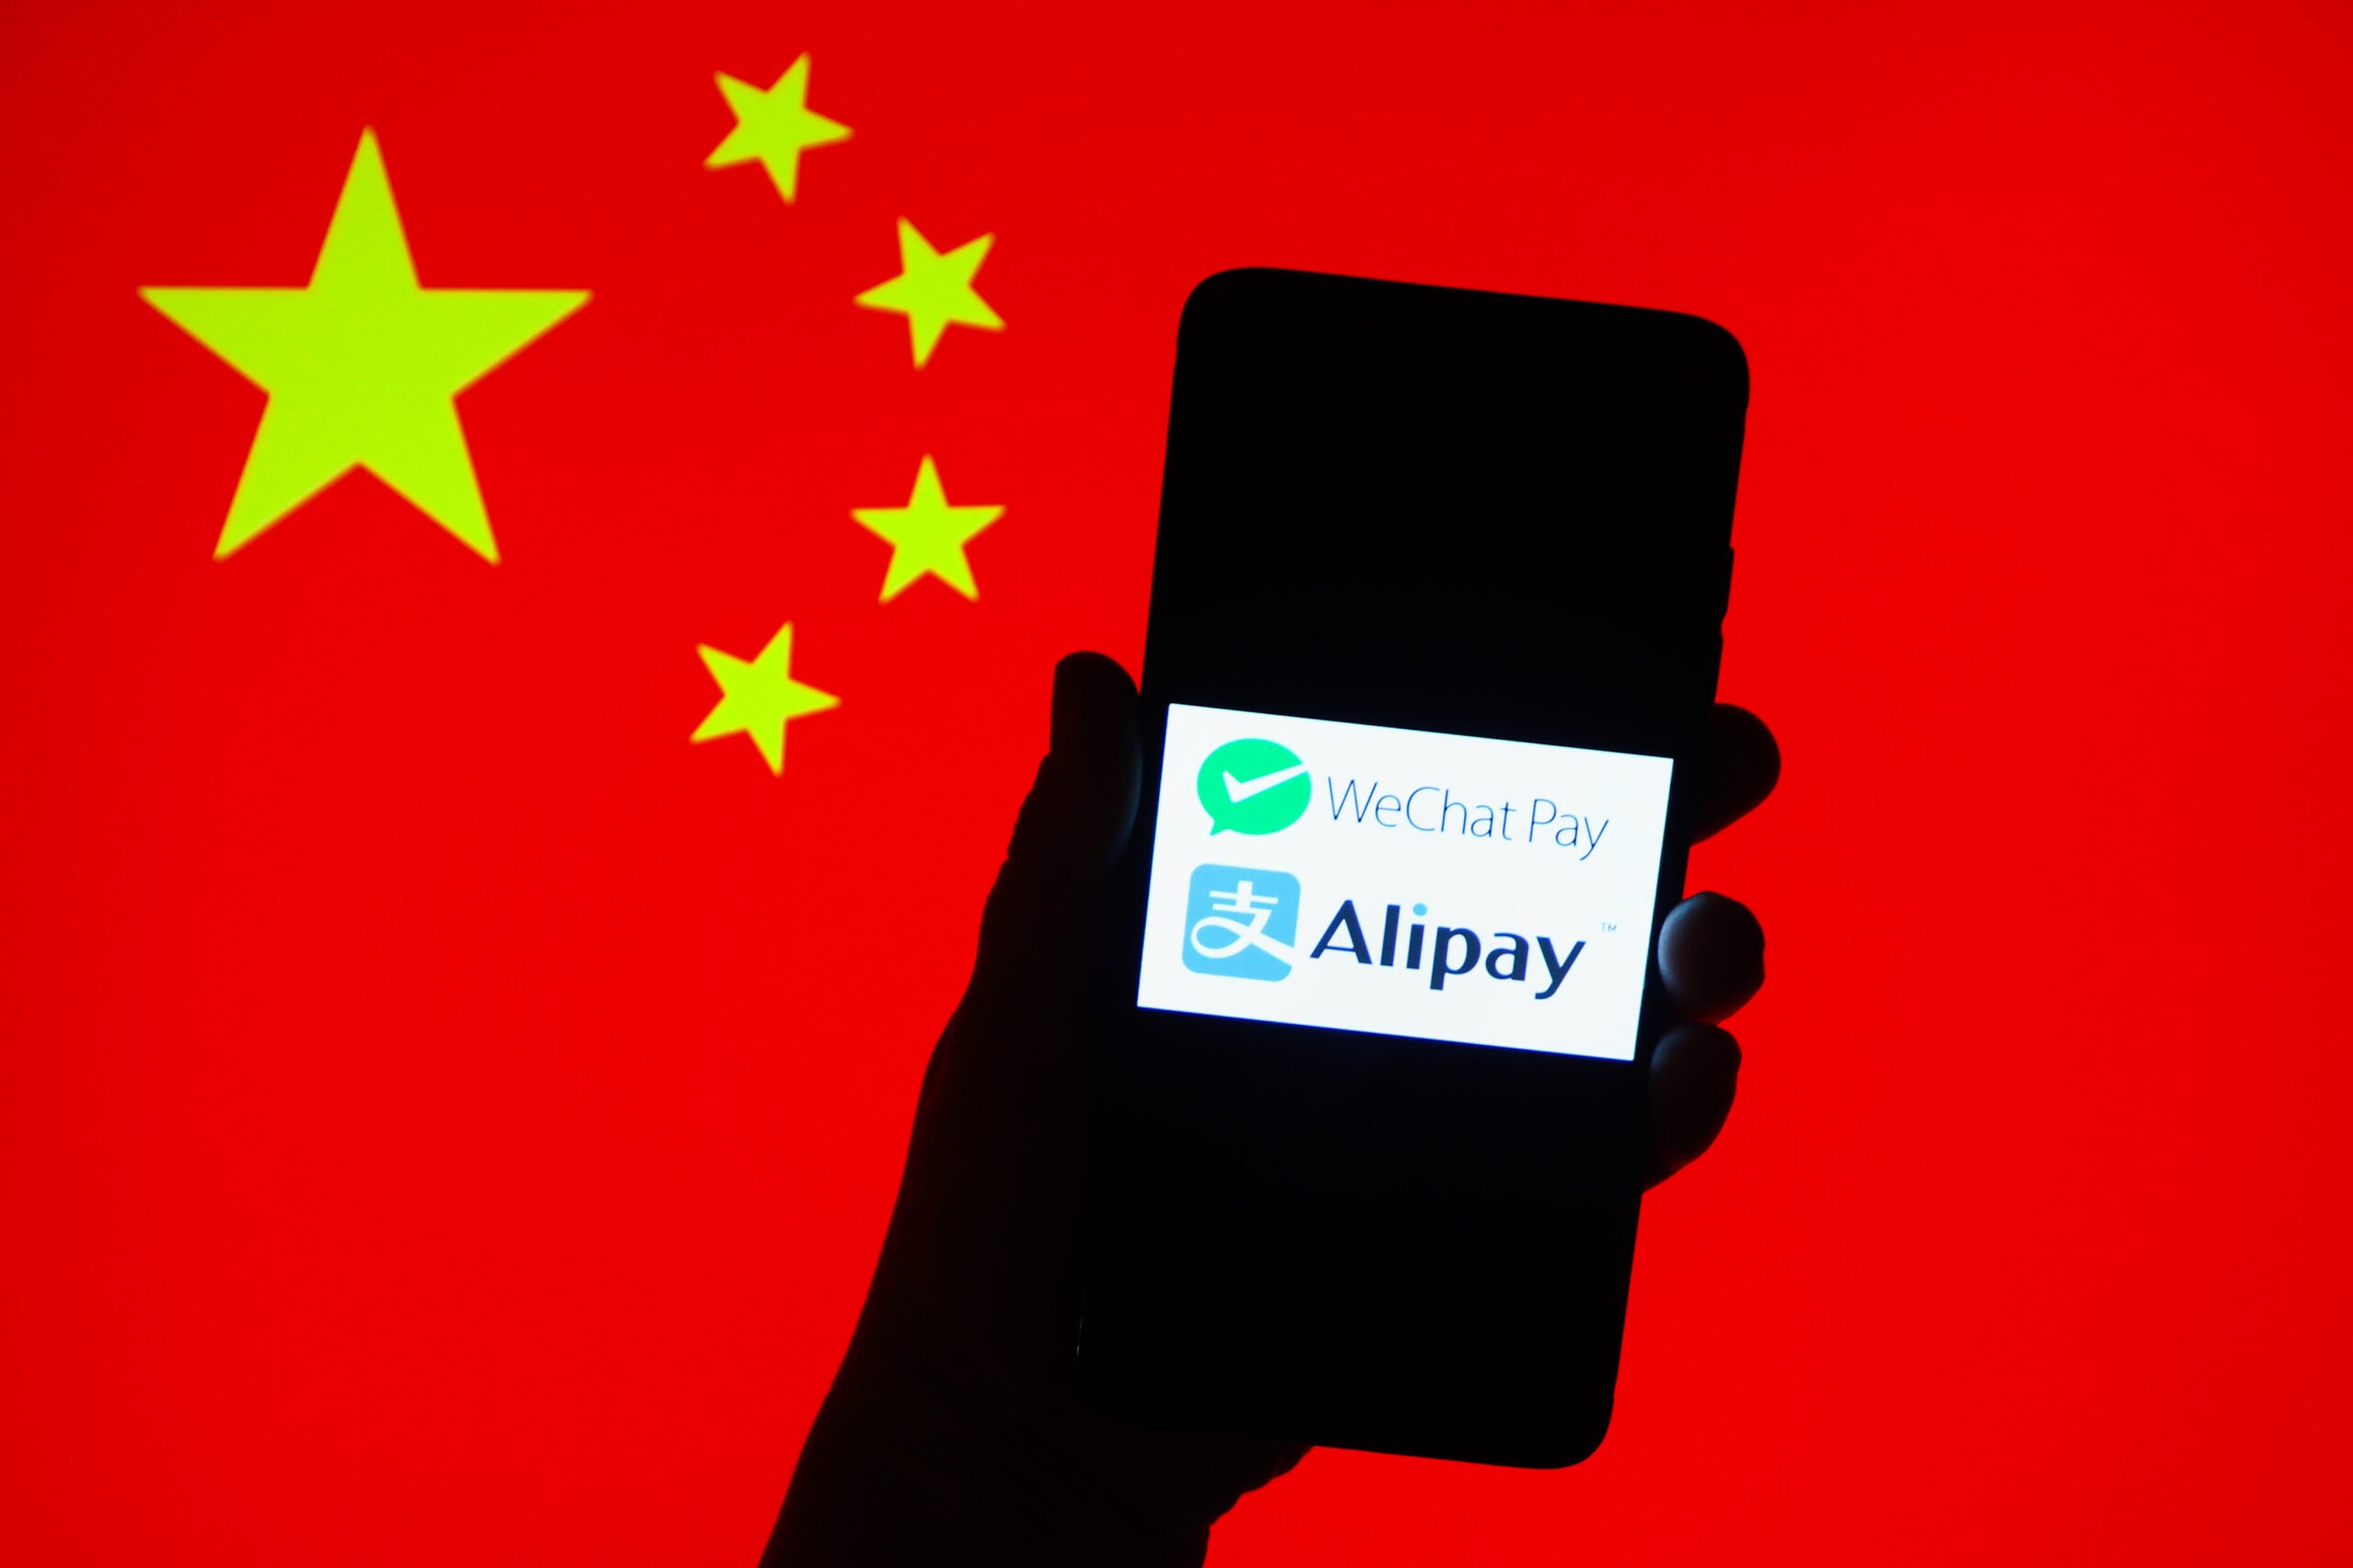 China forces open Alibaba for WeChat payments. Your move, Apple